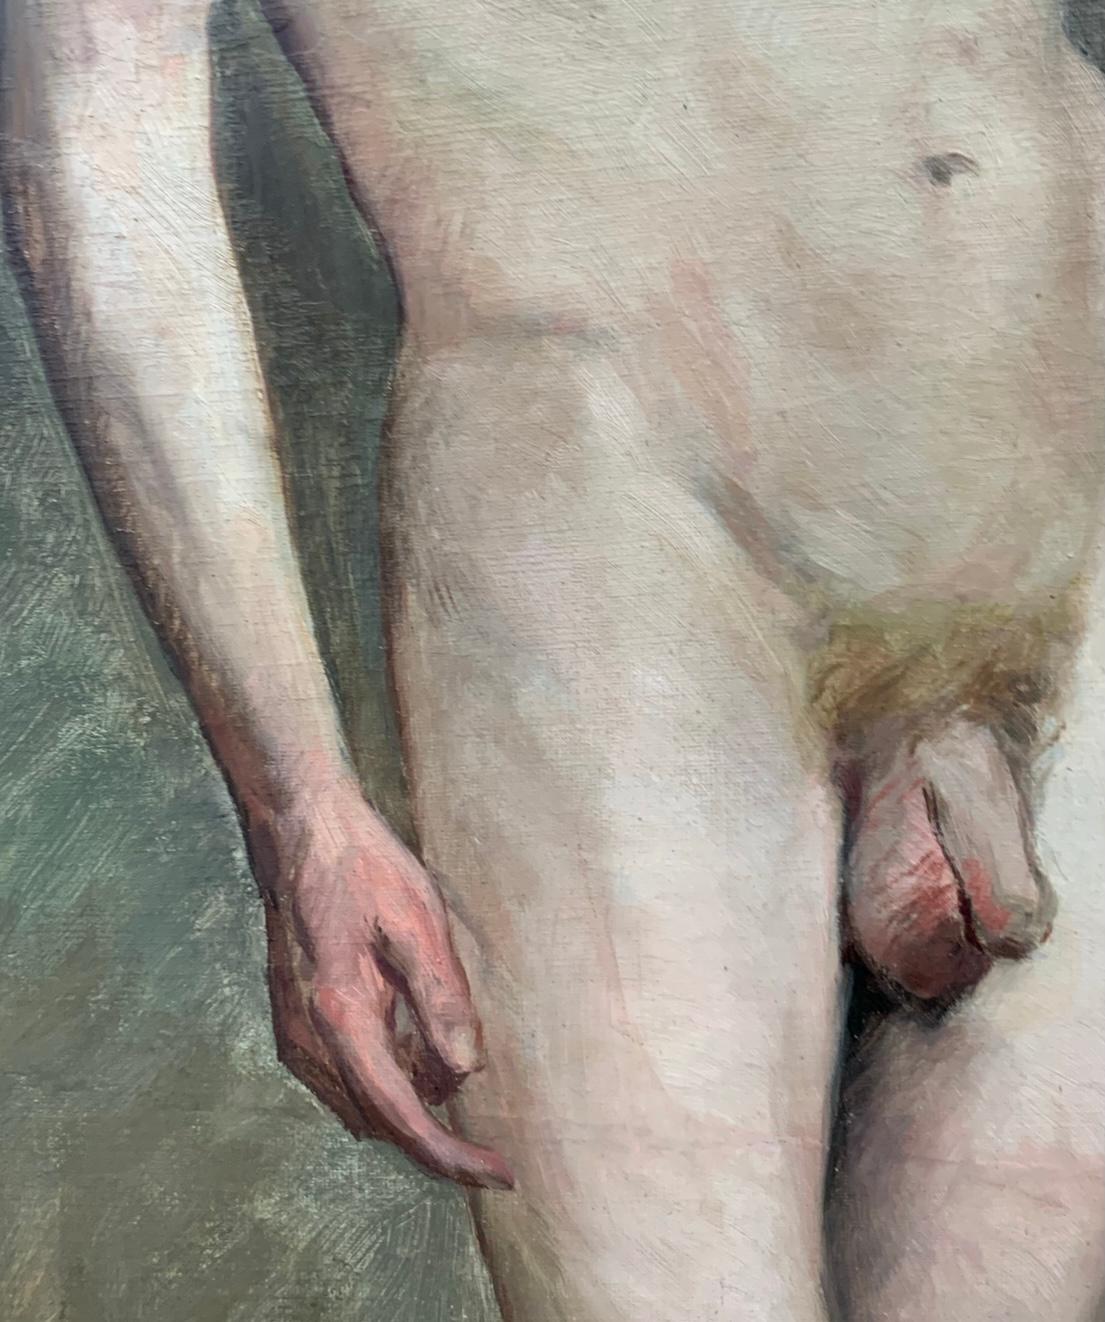 Antique Male Academic nude painting Henri Brugnot with exposition label (1st prize).
by Henri Brugnot (1874-1940)

Oil on canvas board
15